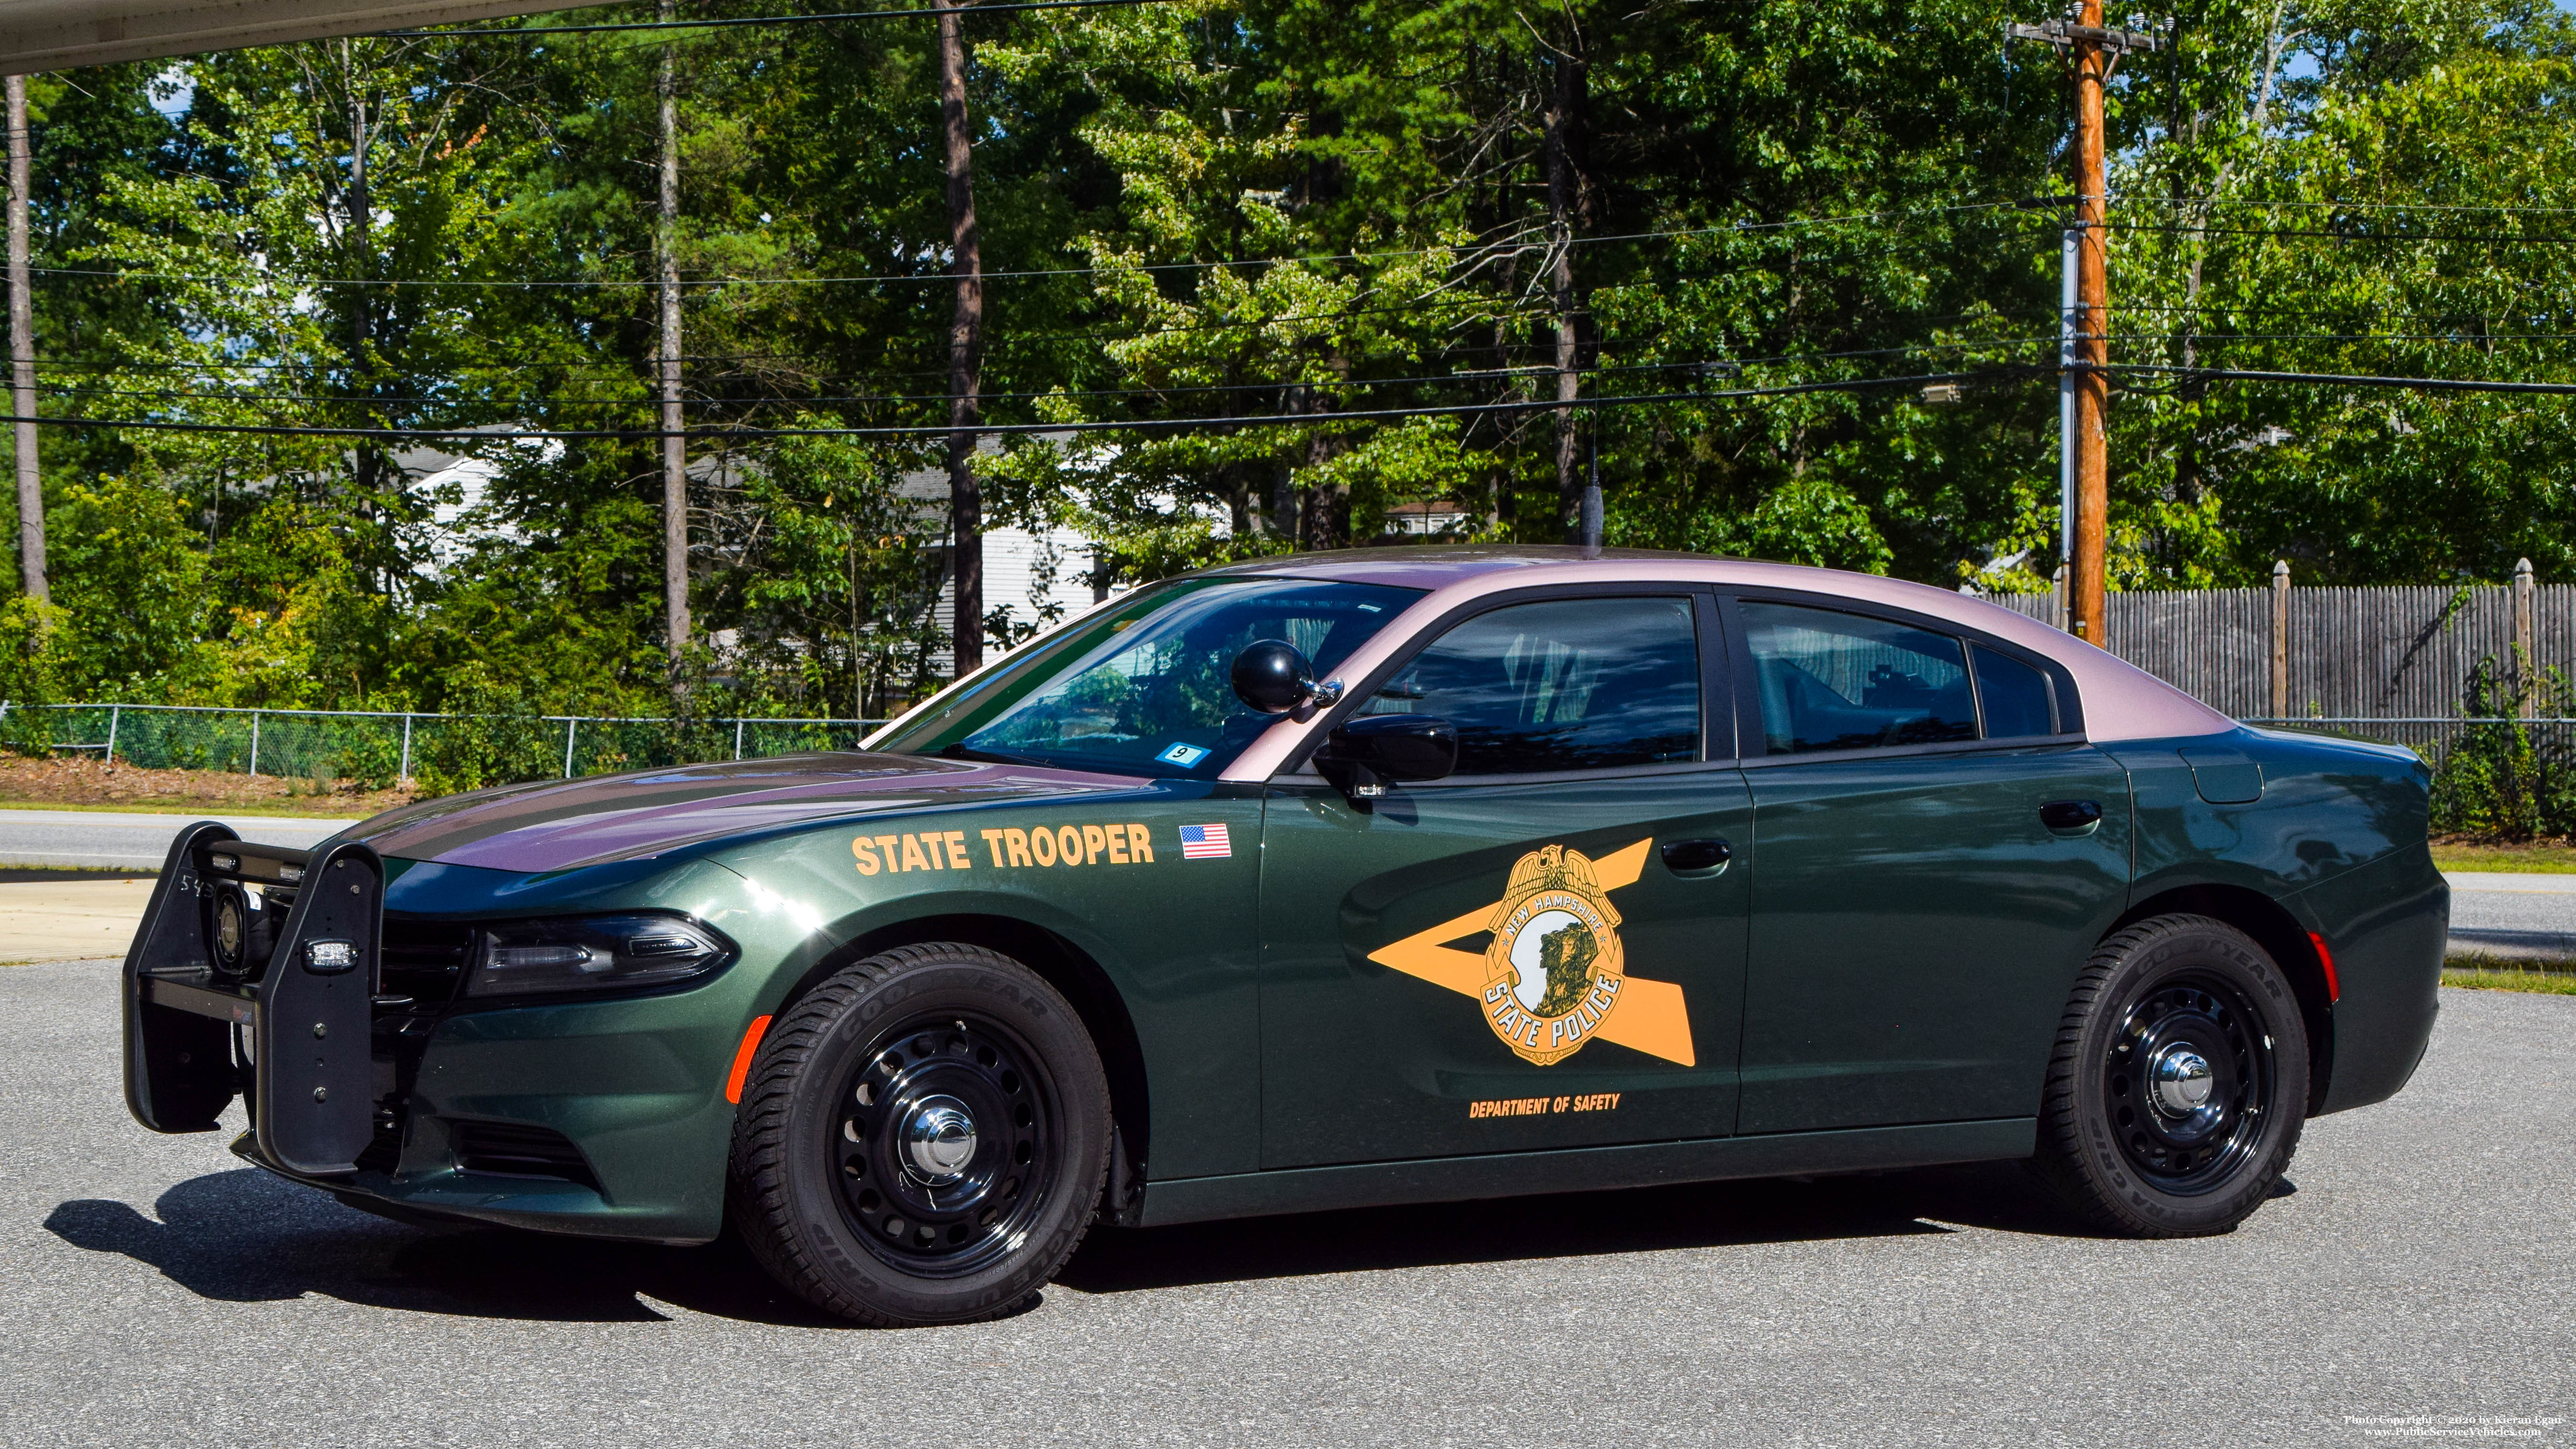 A photo  of New Hampshire State Police
            Cruiser 705, a 2019 Dodge Charger             taken by Kieran Egan